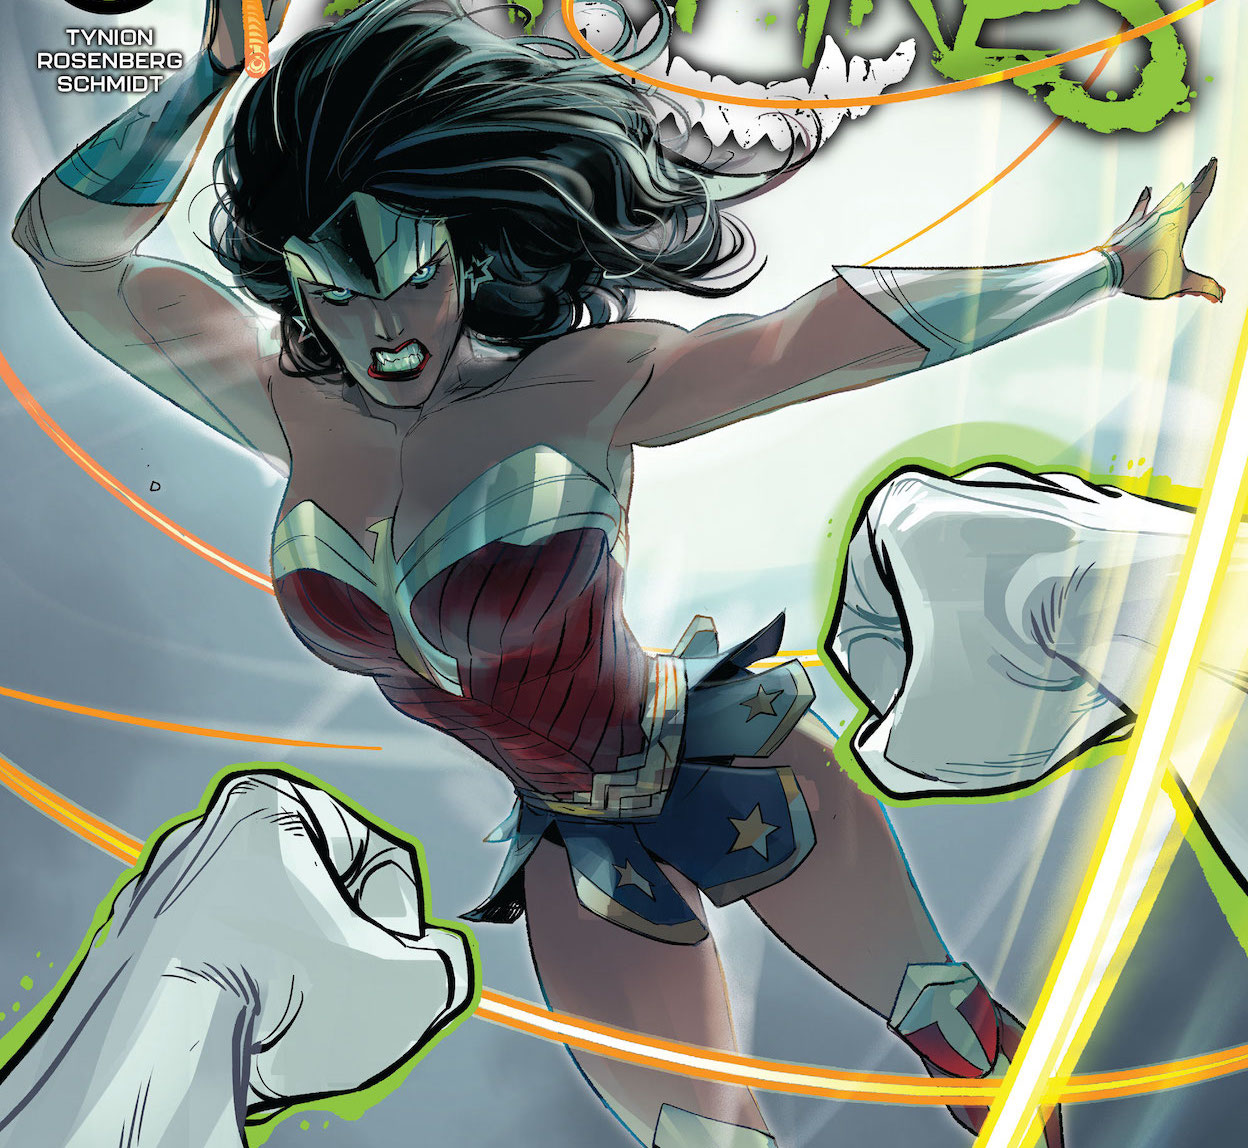 'DC vs. Vampires' #3 features a major hero turn to the dark side